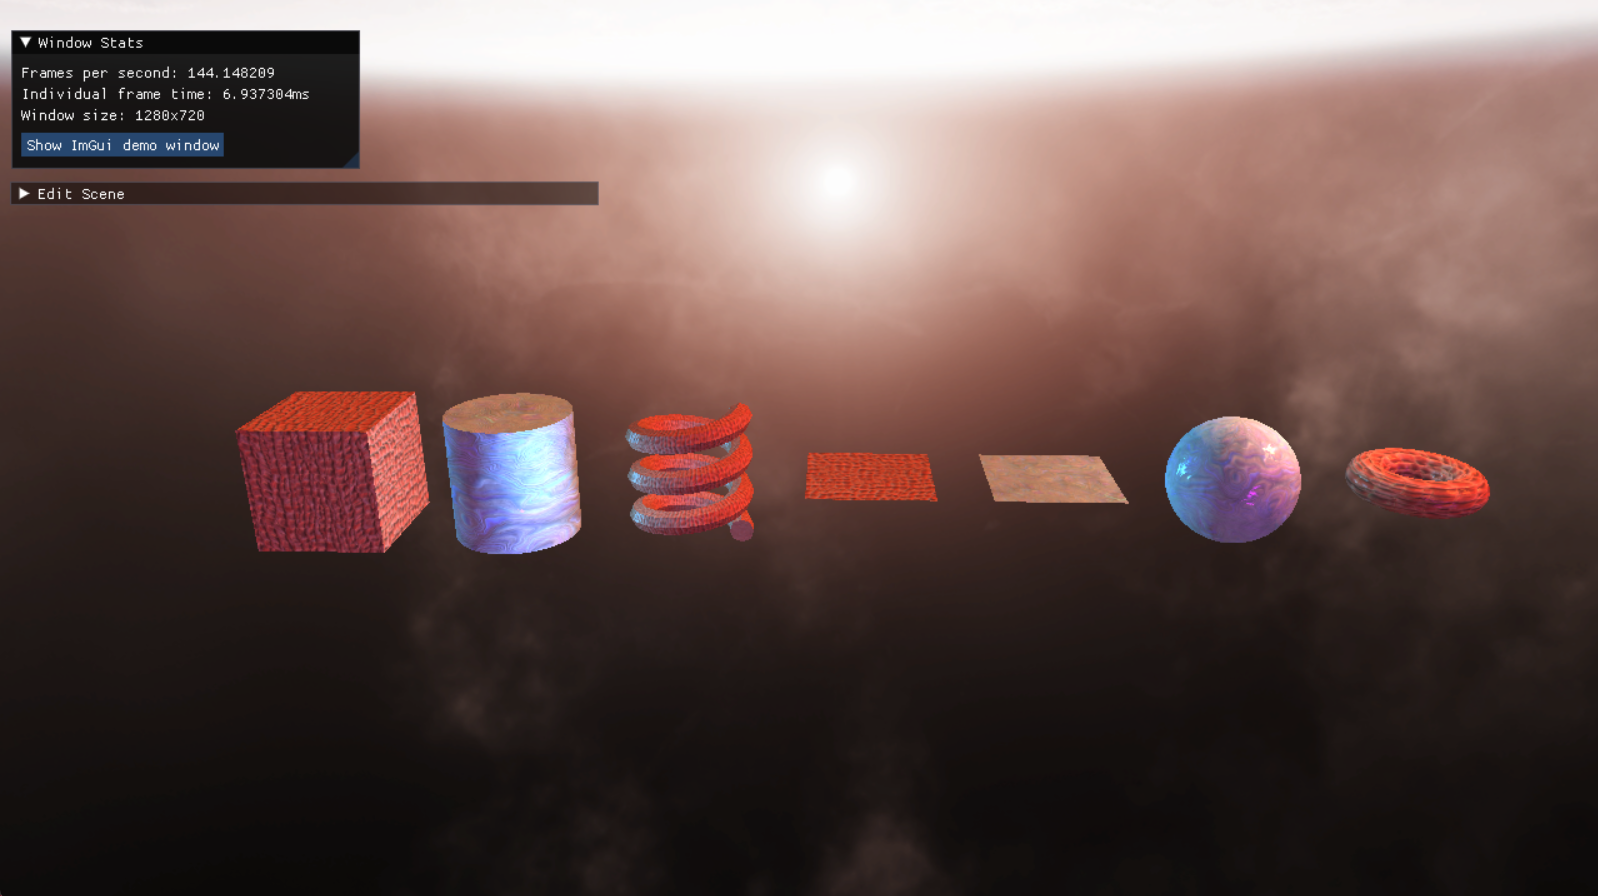 Render of 3D models with normal maps that affect lighting and a skybox